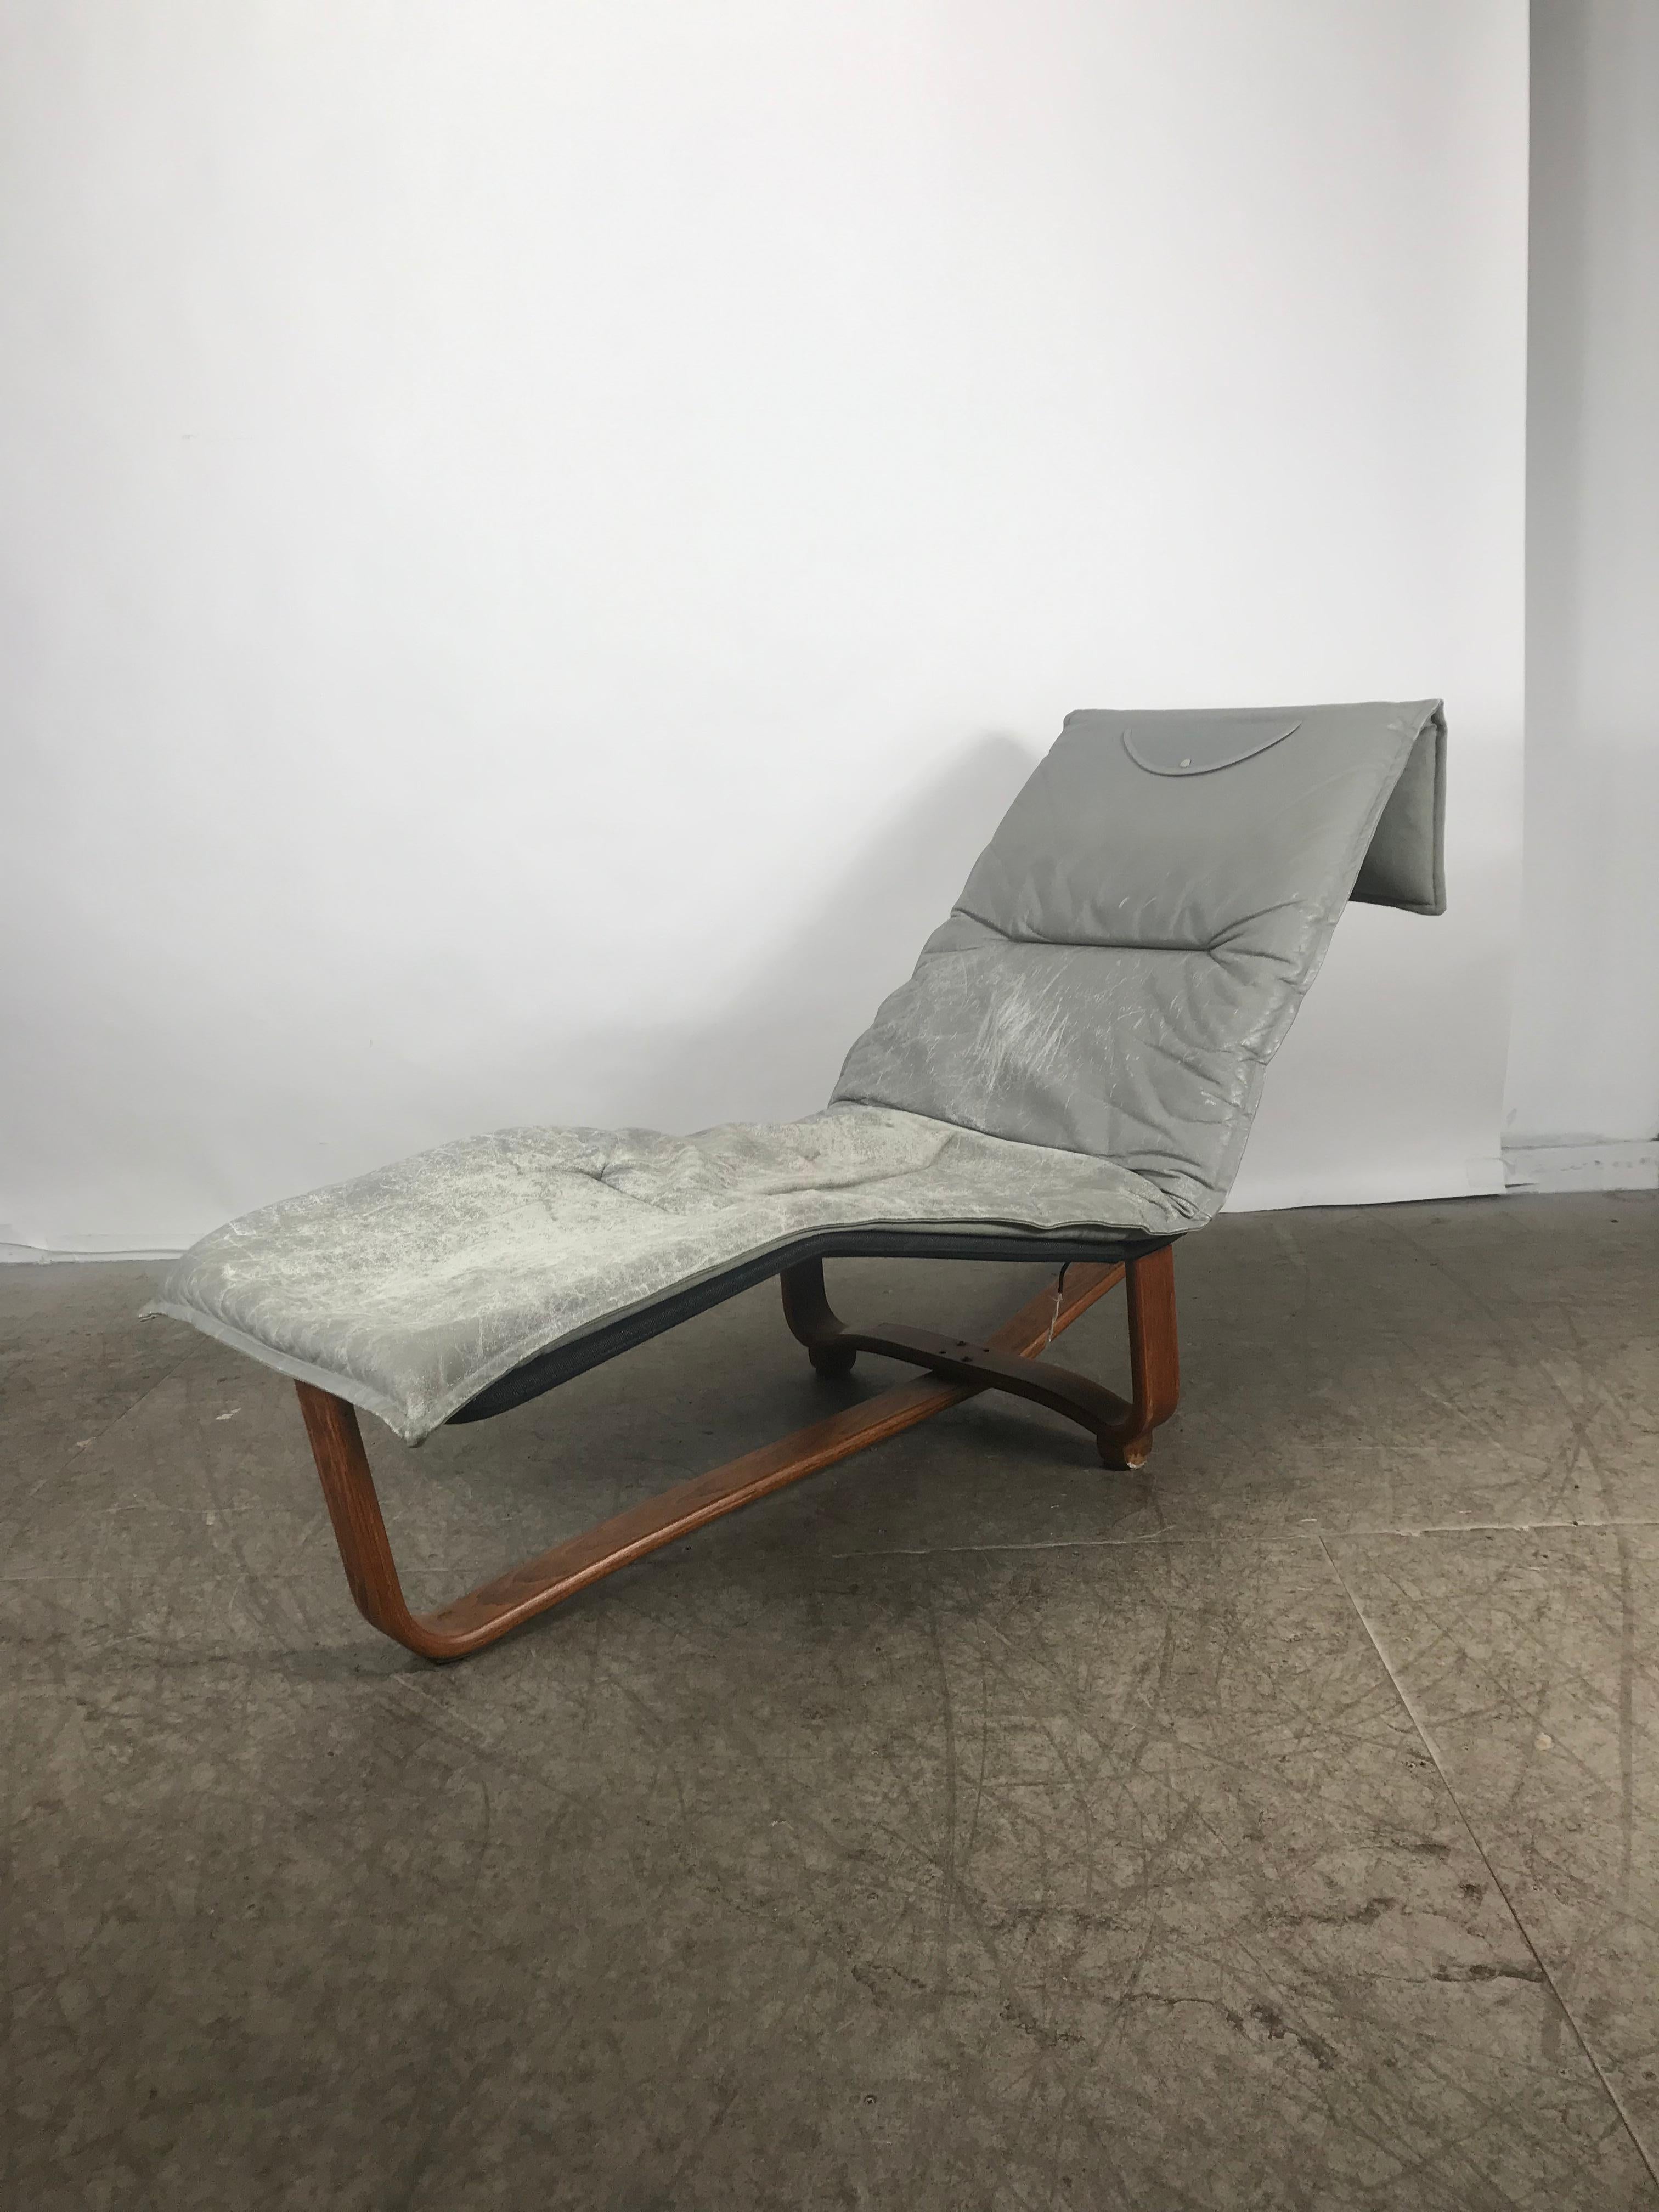 This stunning vintage modern chaise lounge features a stylish and sturdy bentwood base. Versatile design functions as lounge chair to relax on or a daybed for napping. Extremely comfortable piece has a thick padded original leather cushion, hand